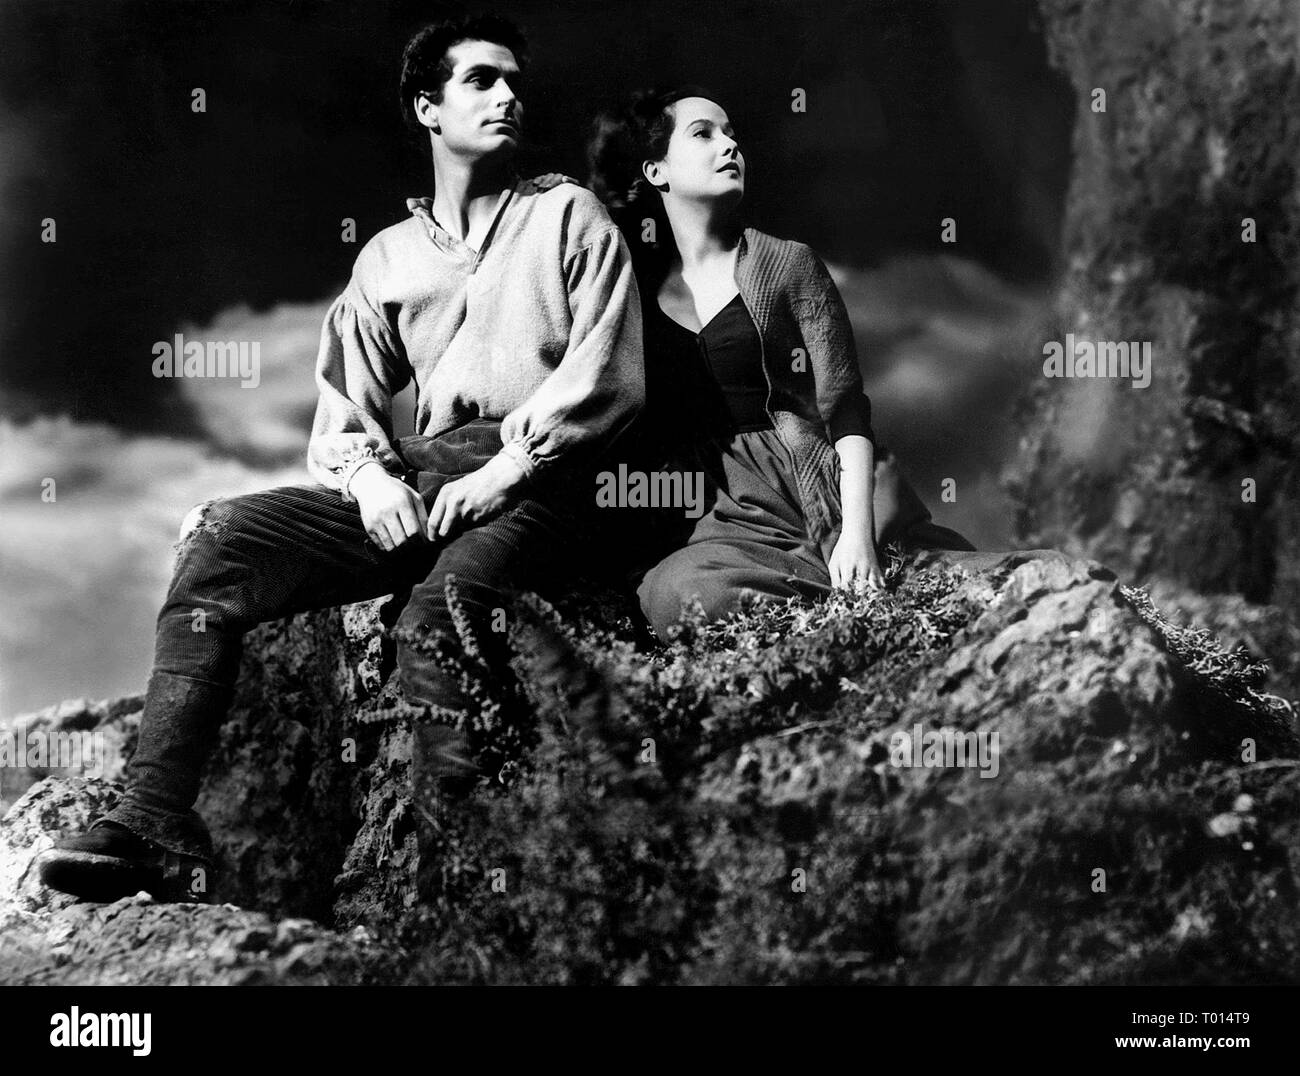 LAURENCE OLIVIER, MERLE OBERON, Wuthering Heights, 1939 Foto Stock